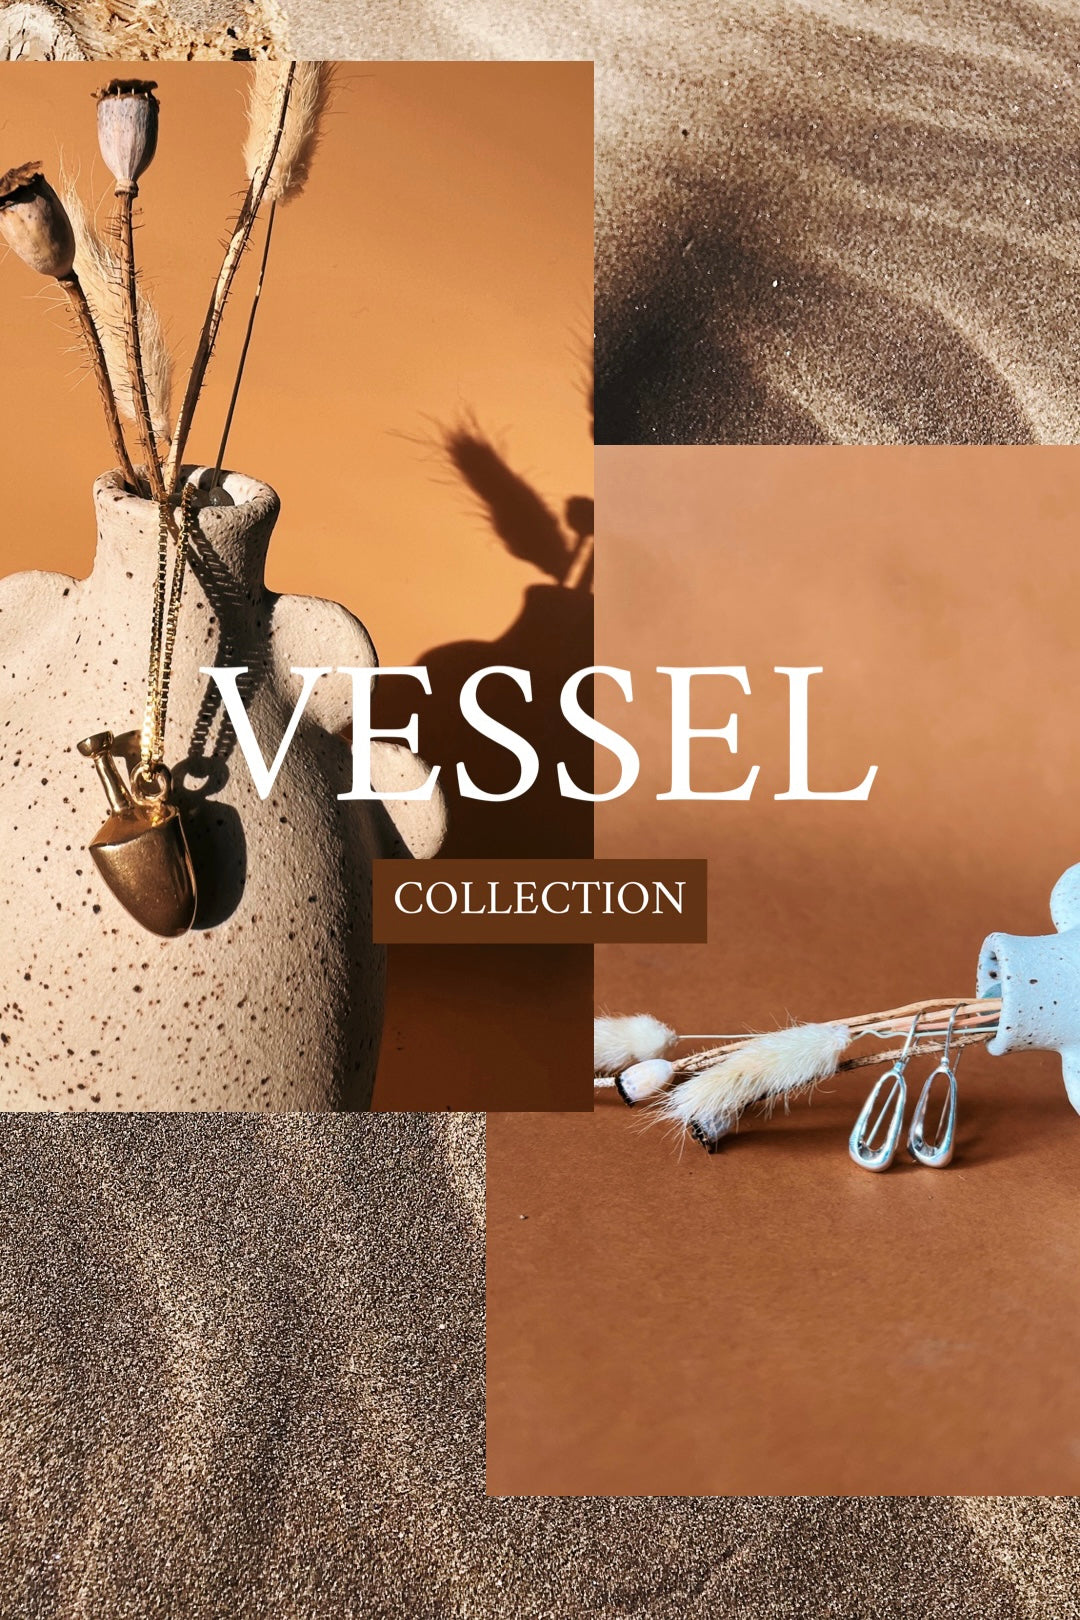 VESSEL COLLECTION INSPIRATION